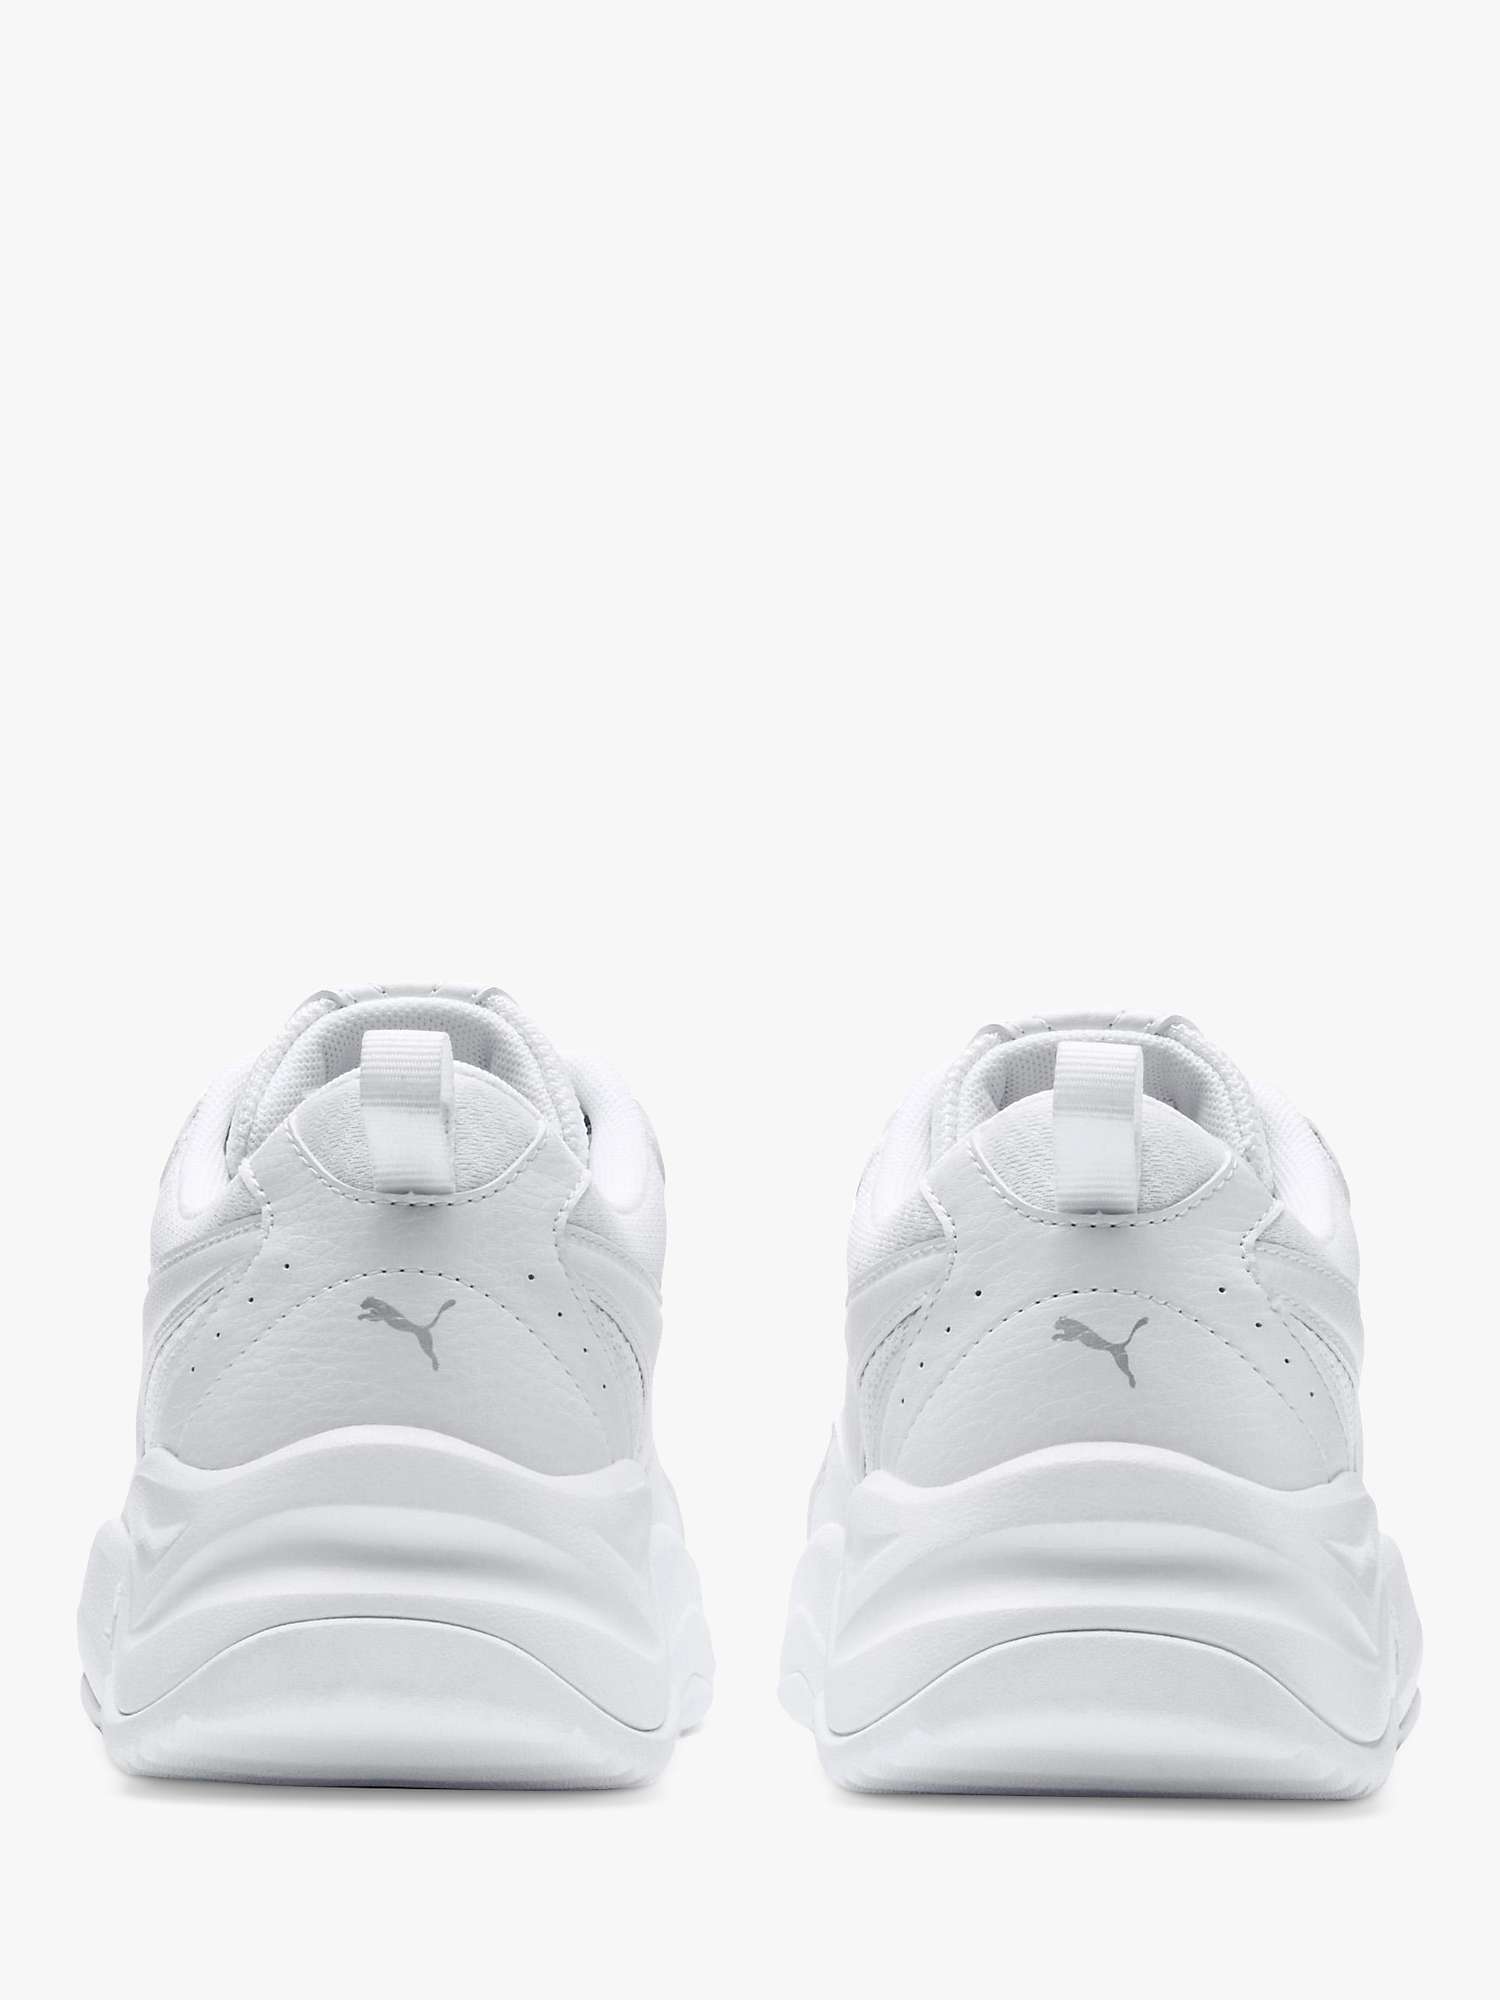 Buy PUMA Cilia Chunky Trainers, White Online at johnlewis.com